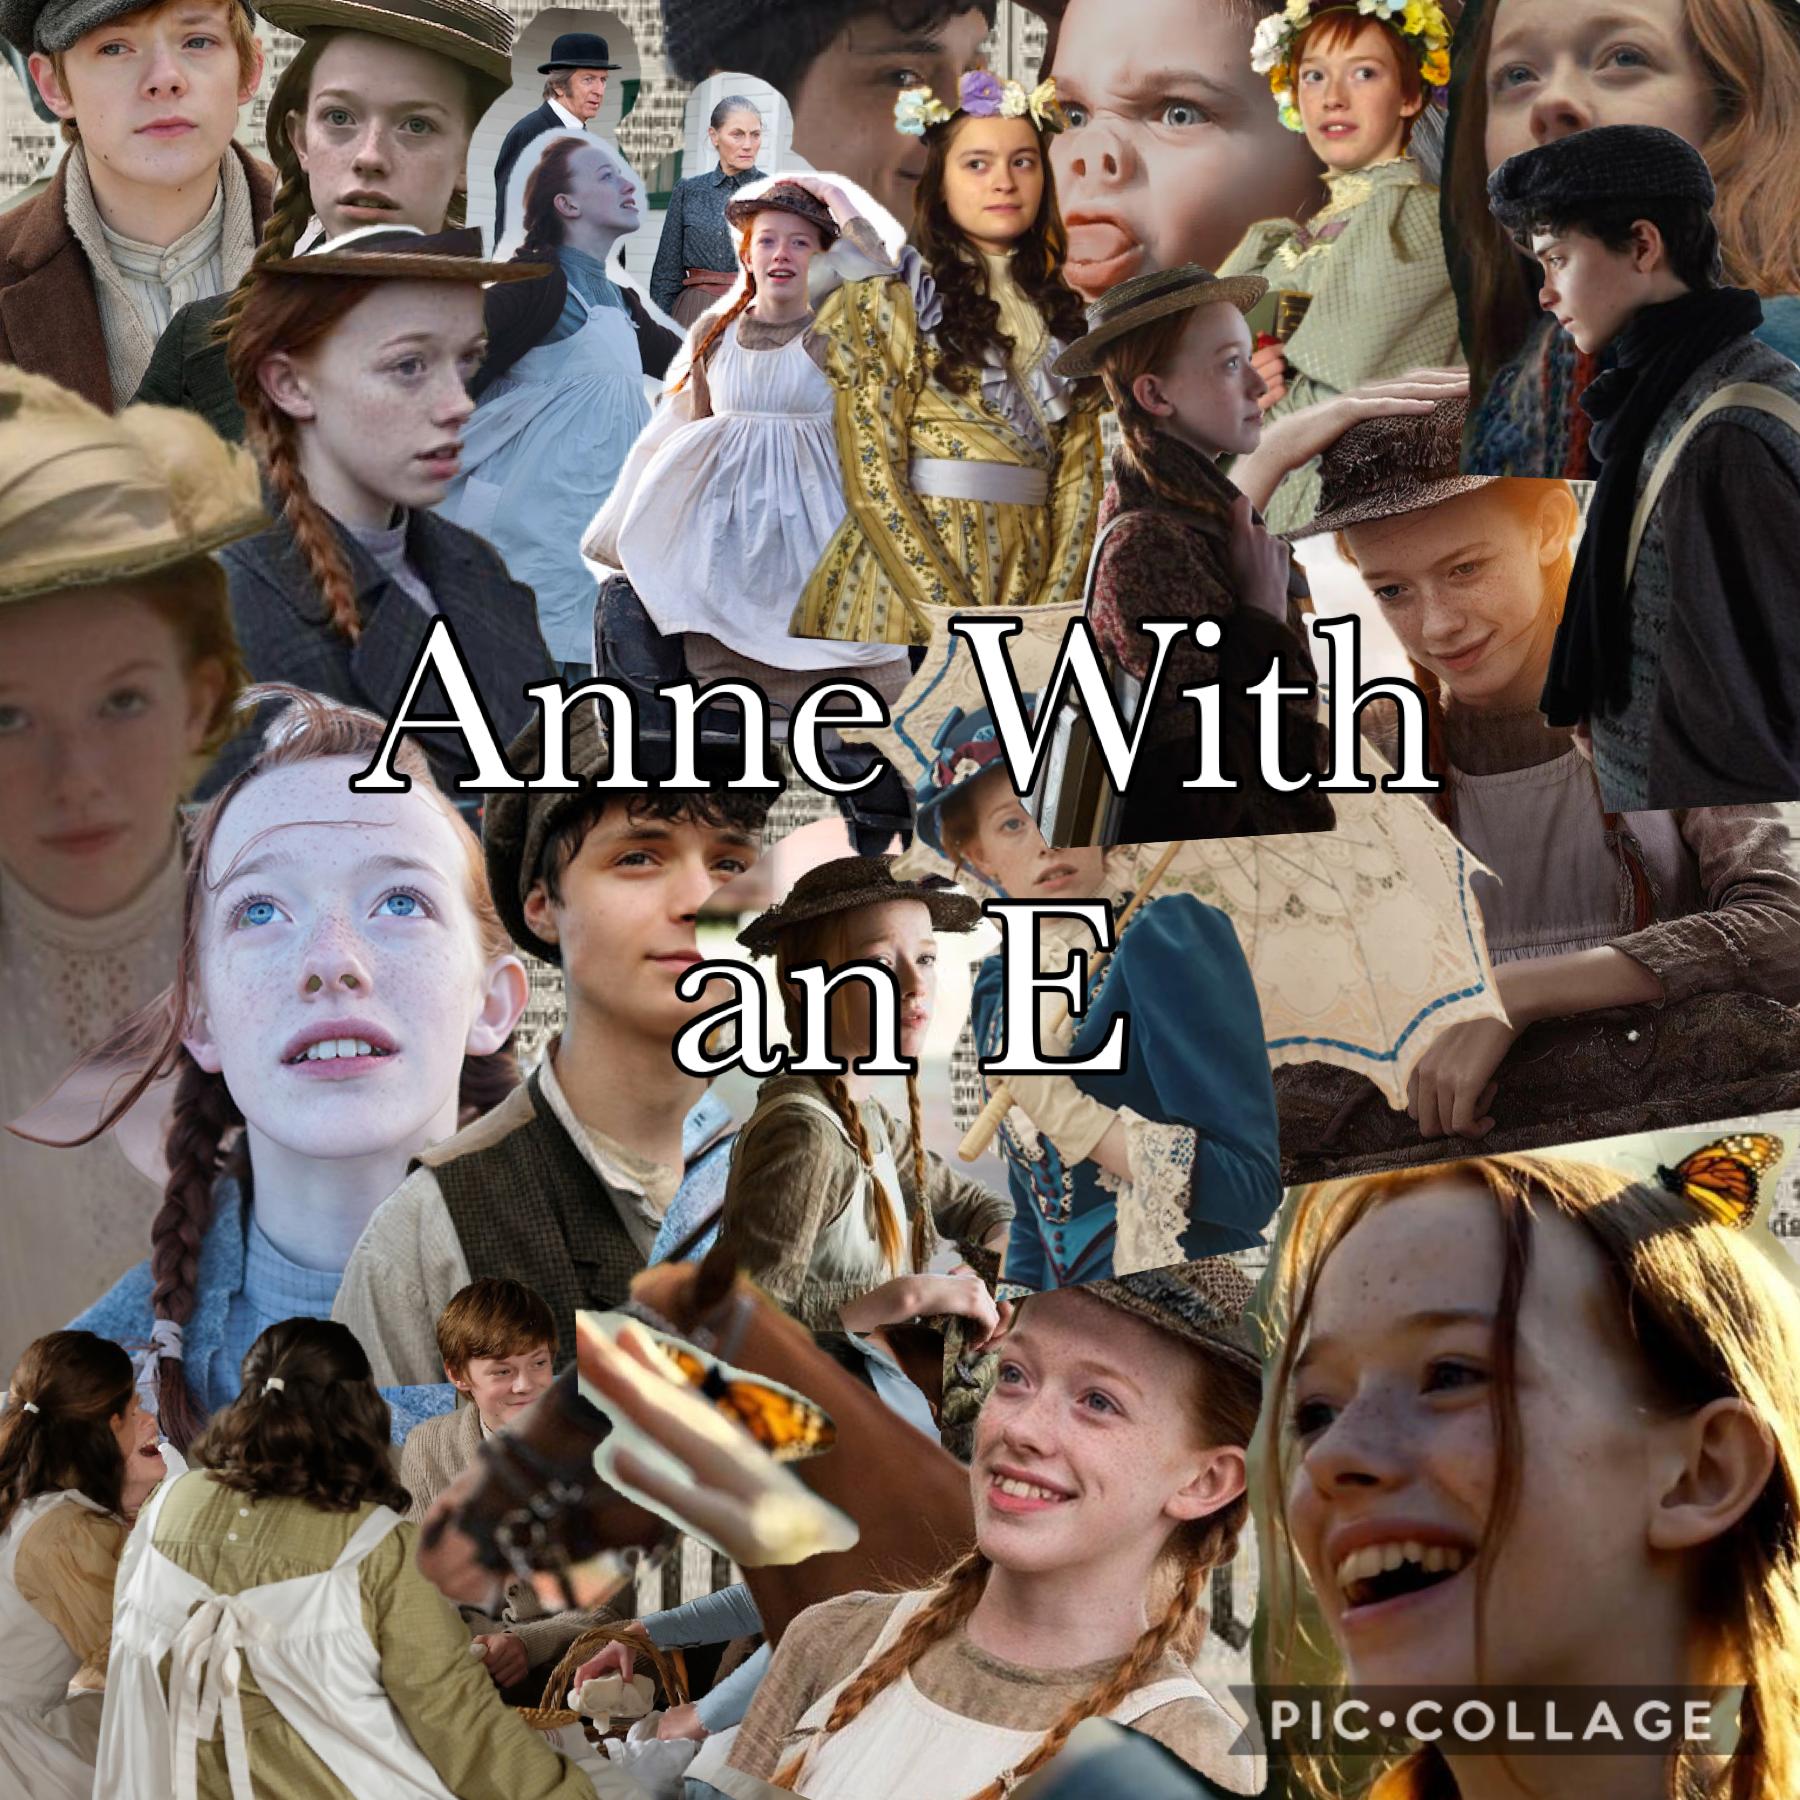 Watching it for the second time because they cancelled it! 😭 #RenewAnneWithAnE